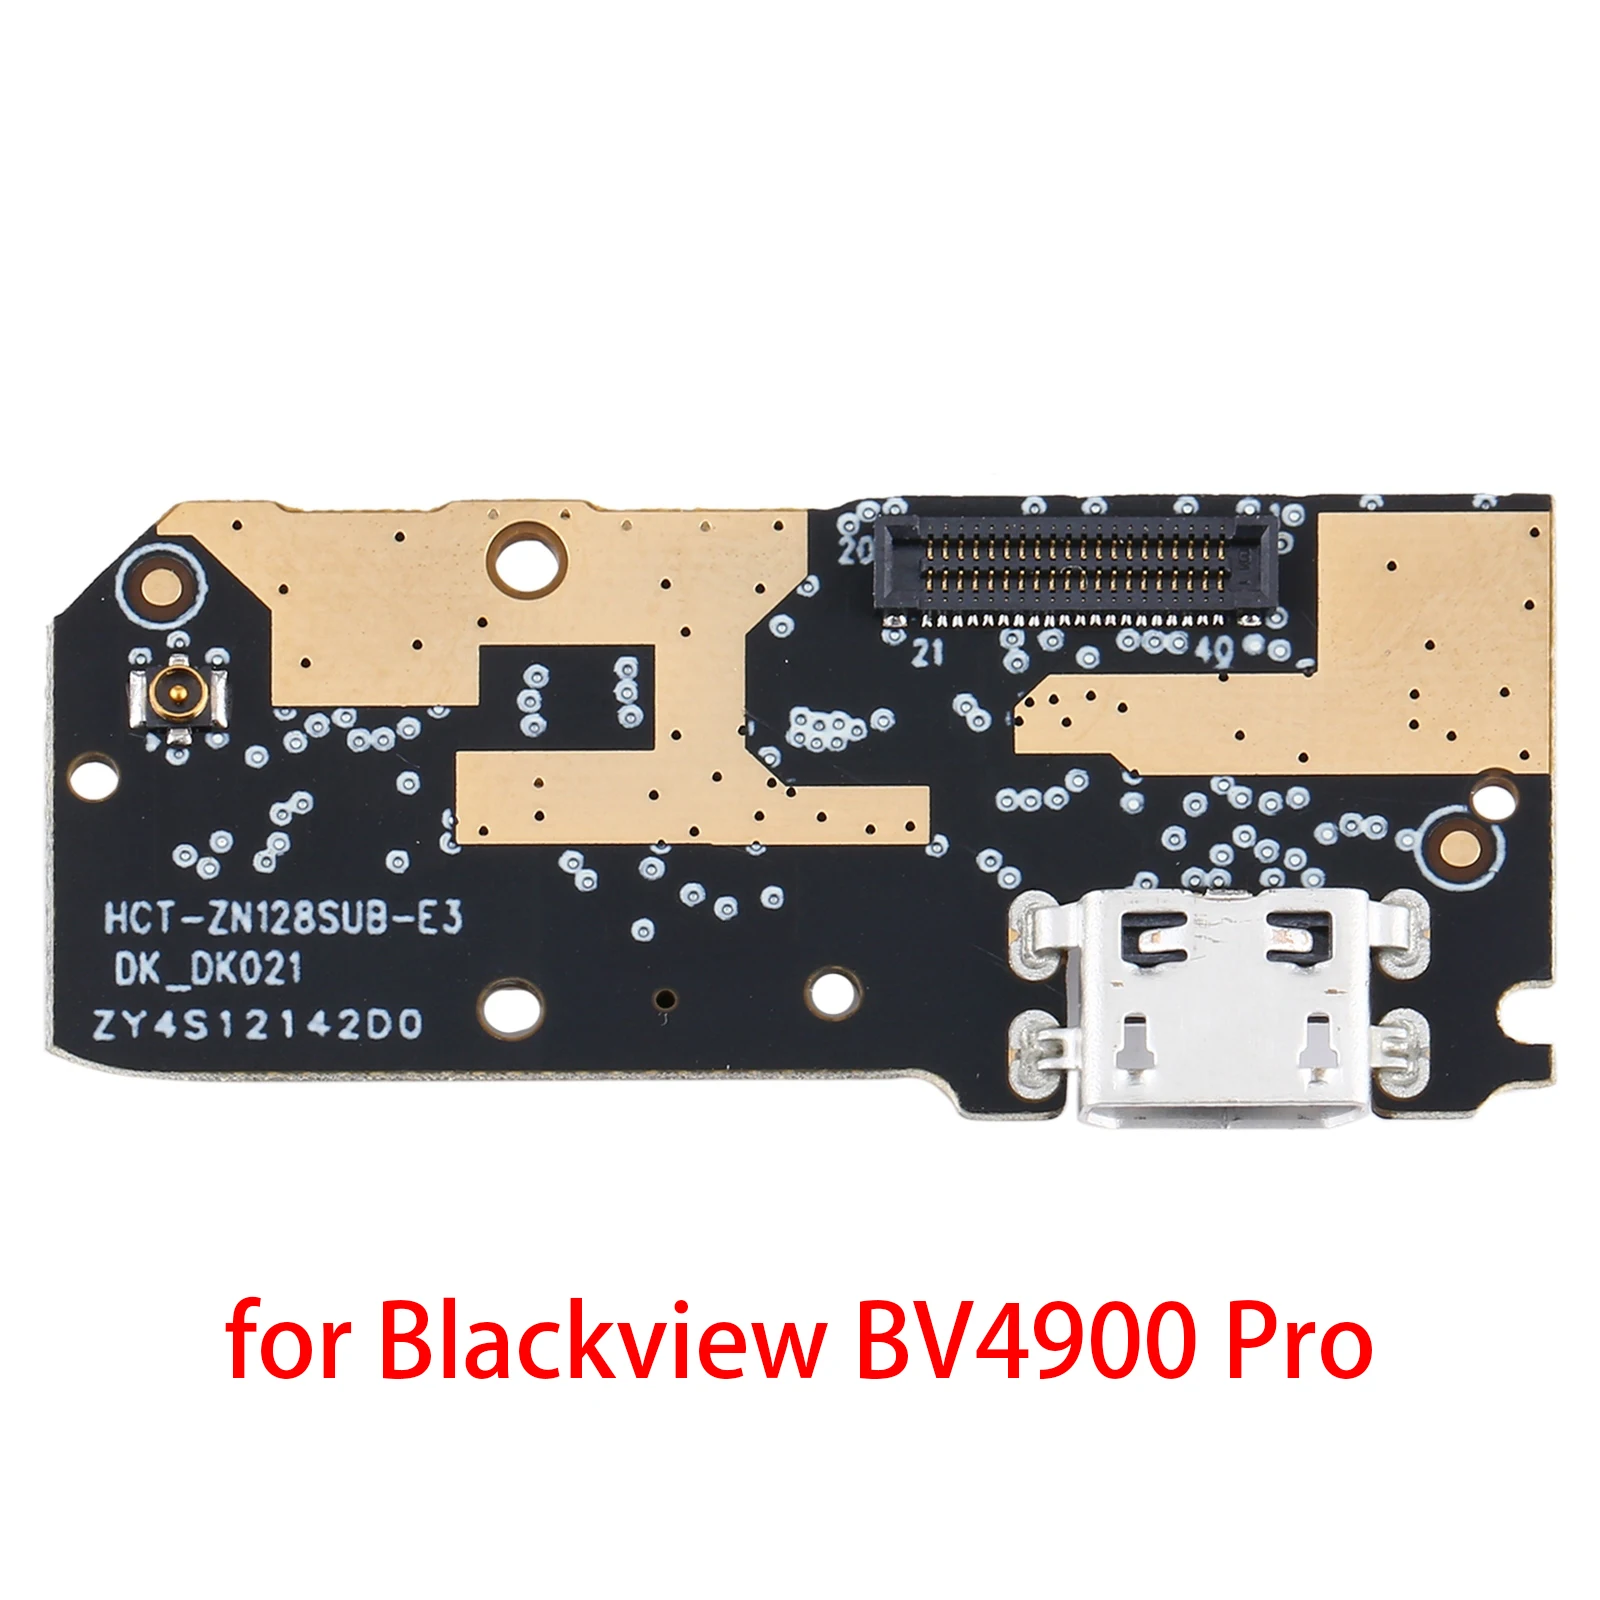 

Original Charging Port Board for Blackview BV4900 / BV4900 Pro USB Charging Dock Power Connector Flex Cable Replacement Repair